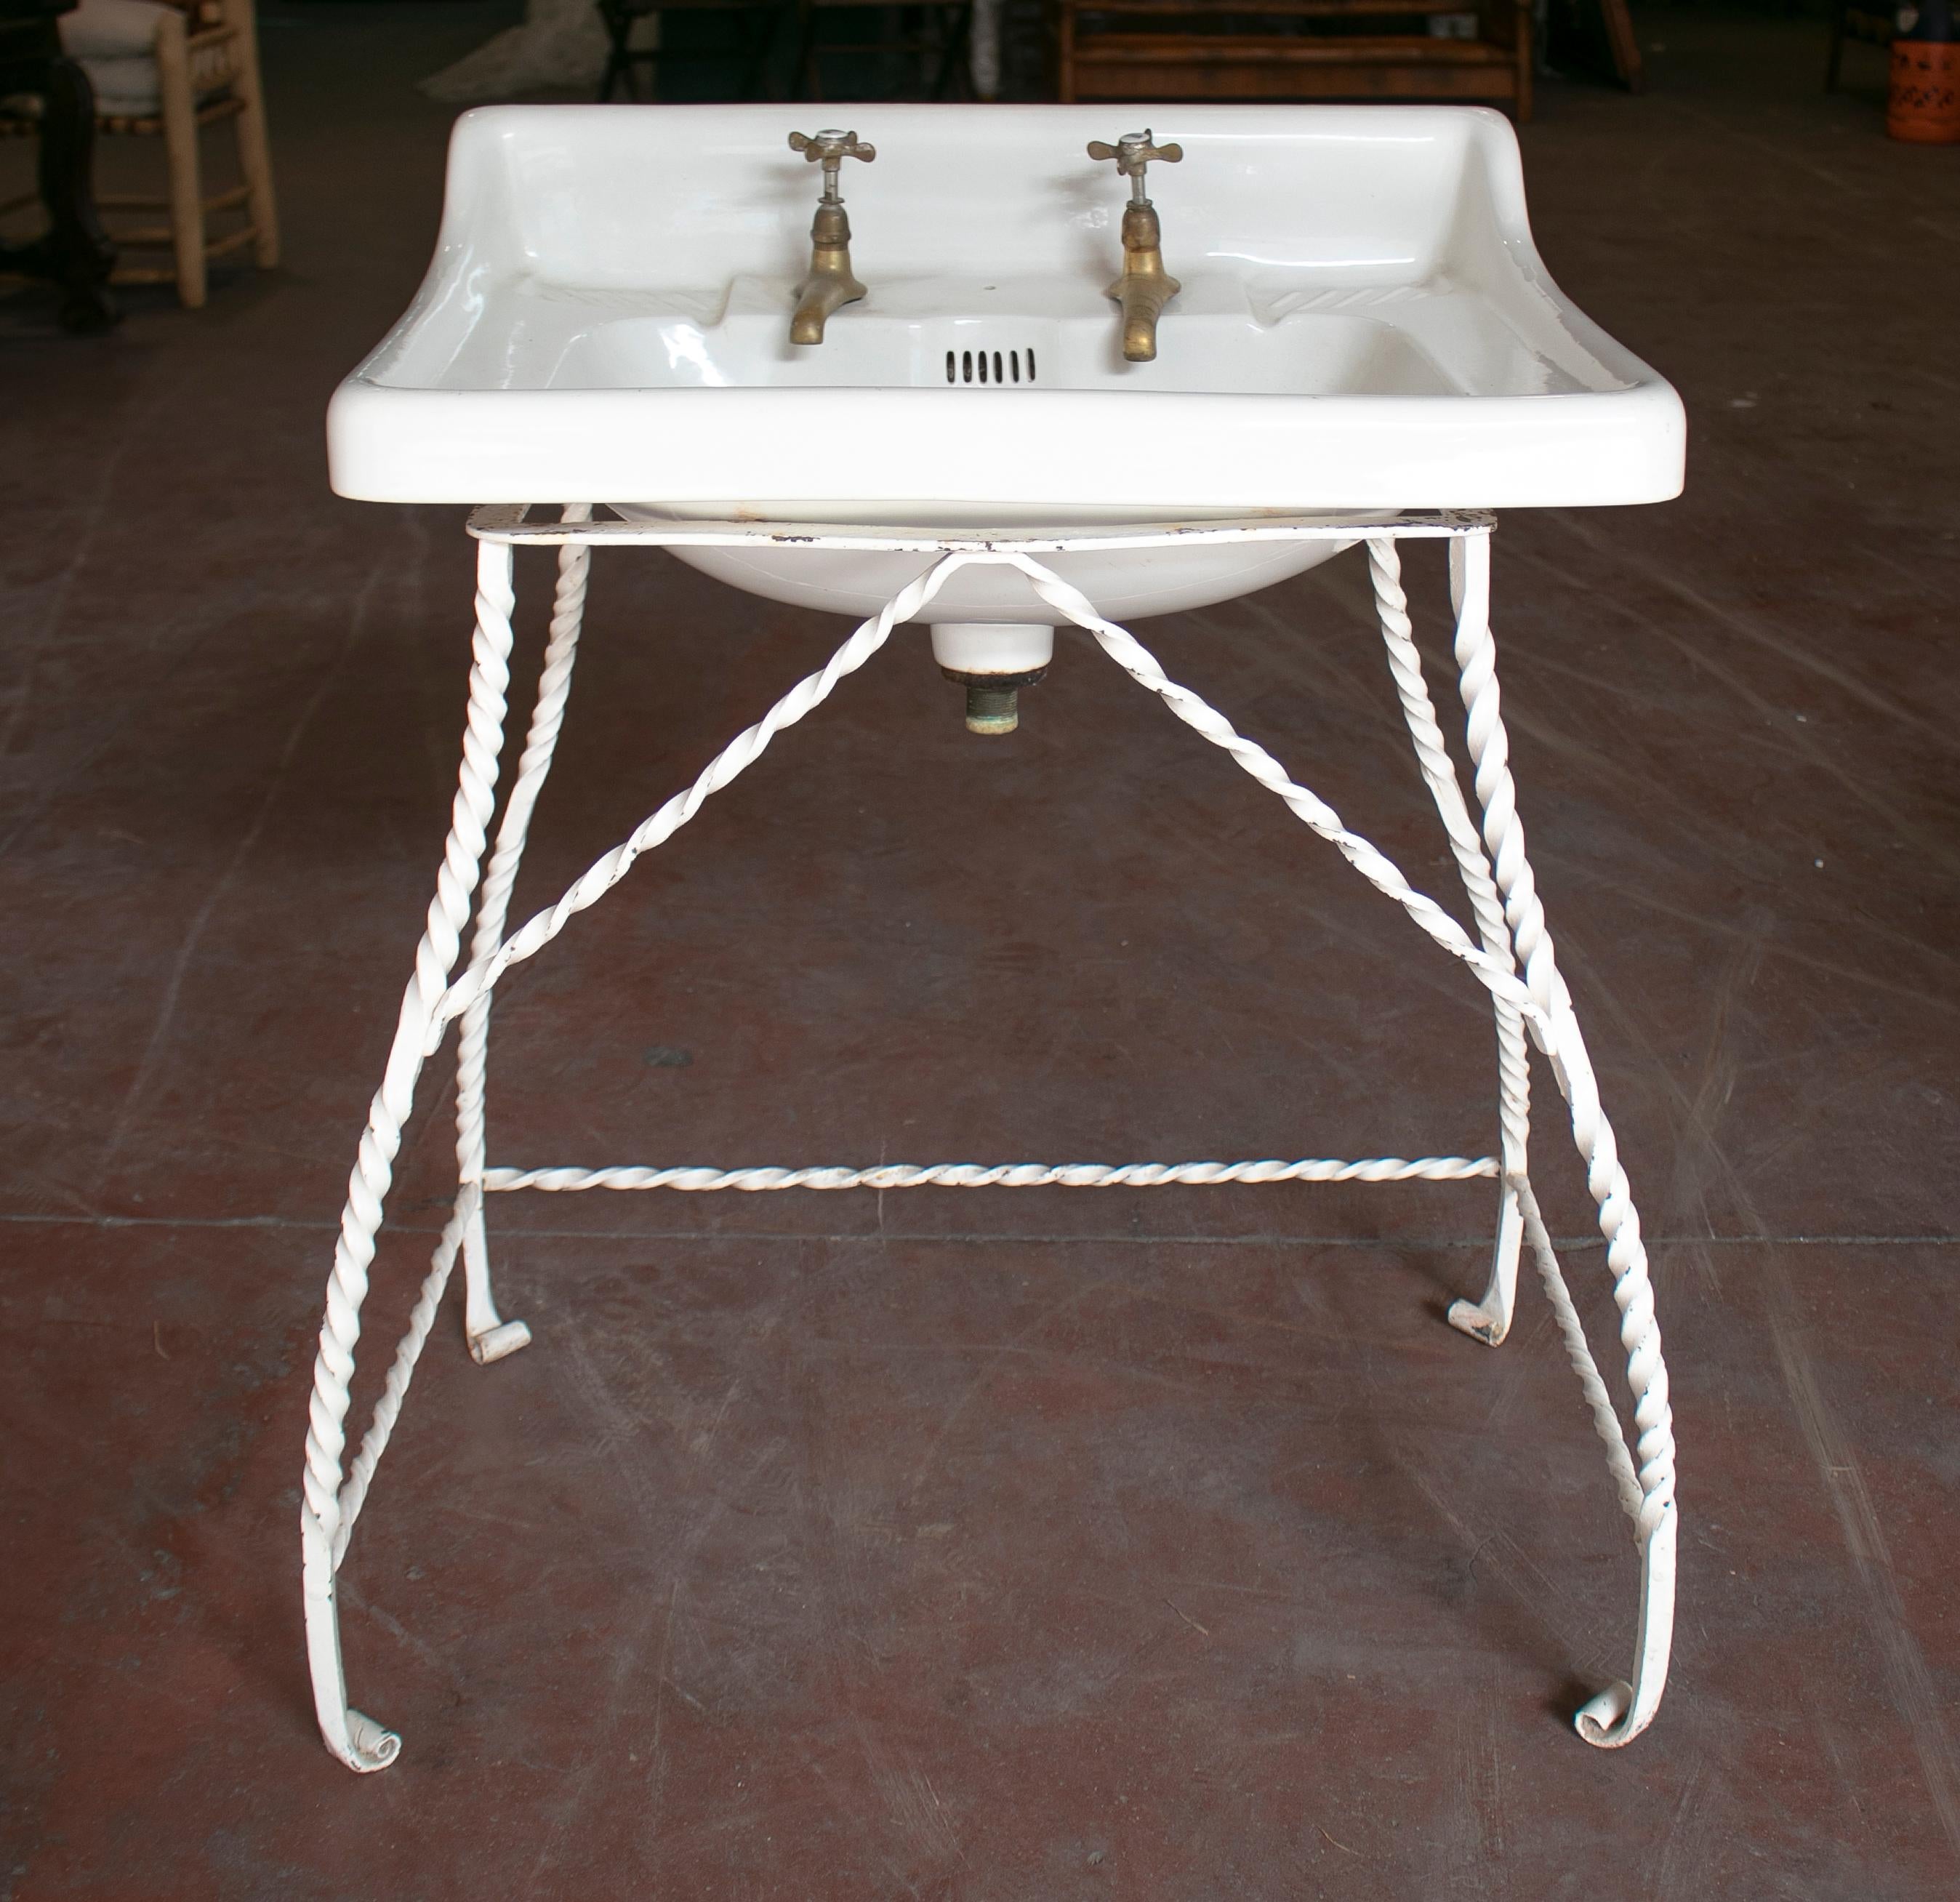 1940s Spanish porcelain wash basin with bronze taps and iron stand.